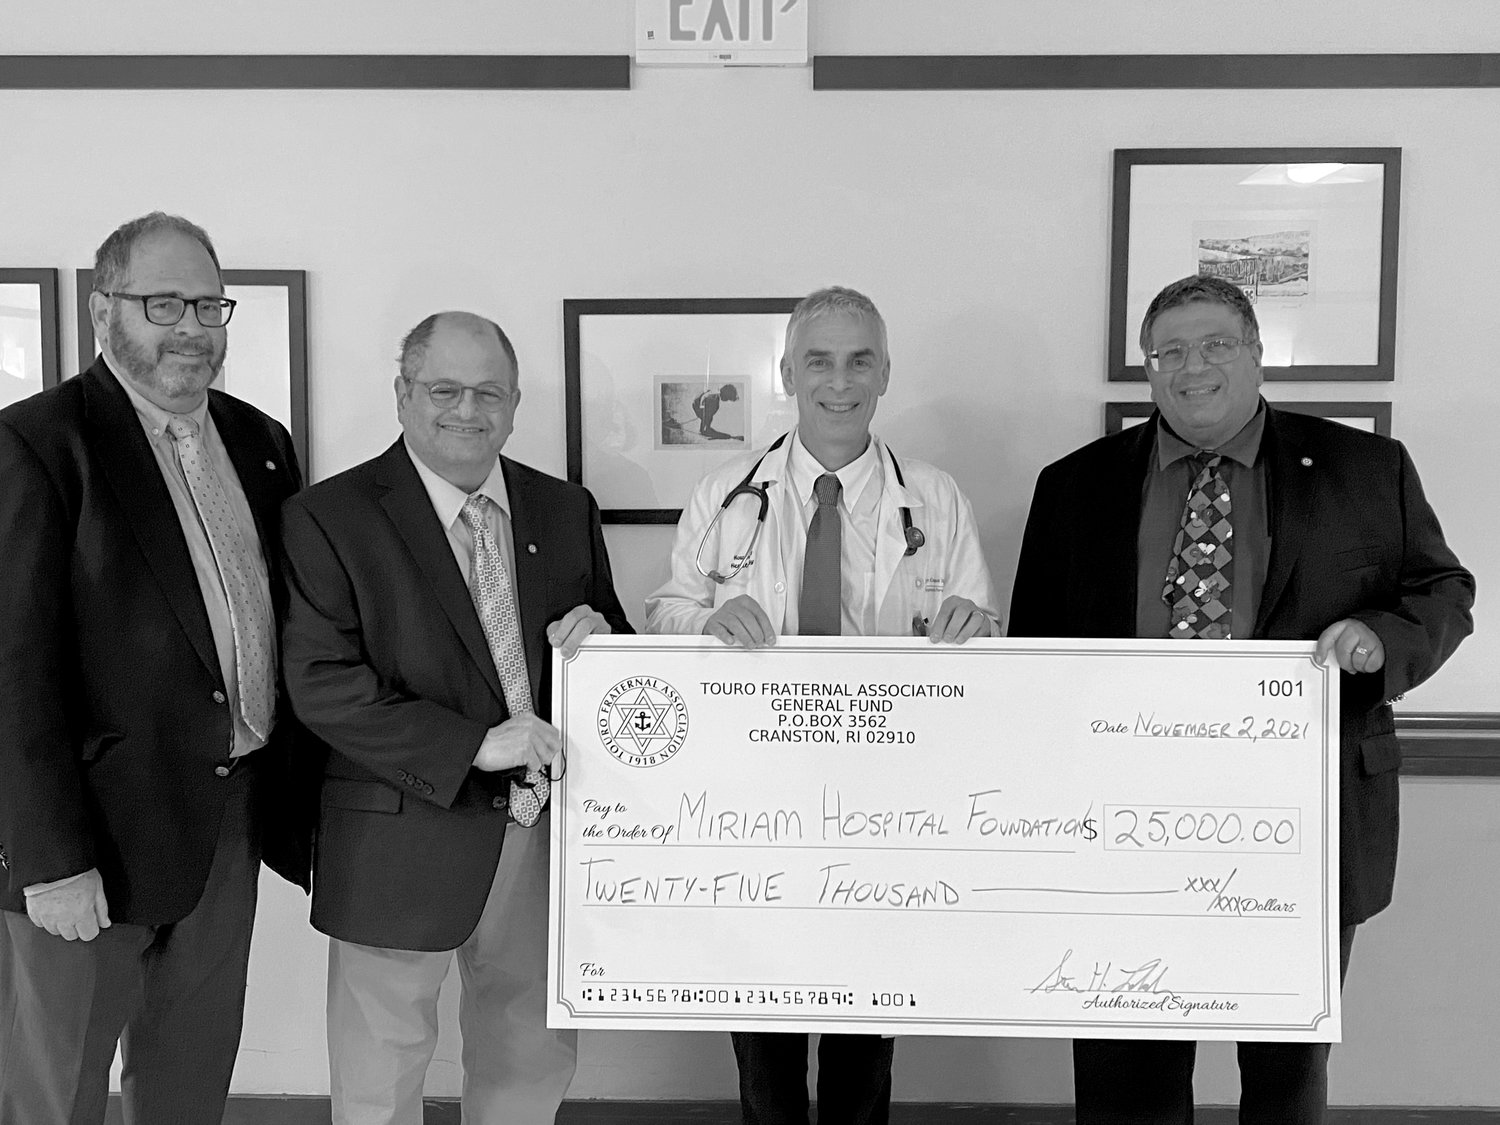 Dr. Howard Safran (second from right), chief of oncology at the Miriam Hospital, accepts a $25,000 donation from Touro Fraternal Association to the hospital's Center for Innovative Cancer Research.  Representing Touro are, from left, Jeffrey Davis, vice chairman of the board of directors; Barry Schiff, chairman of the Community Involvement Committee; and Stevan Labush, chairman of the board of directors.